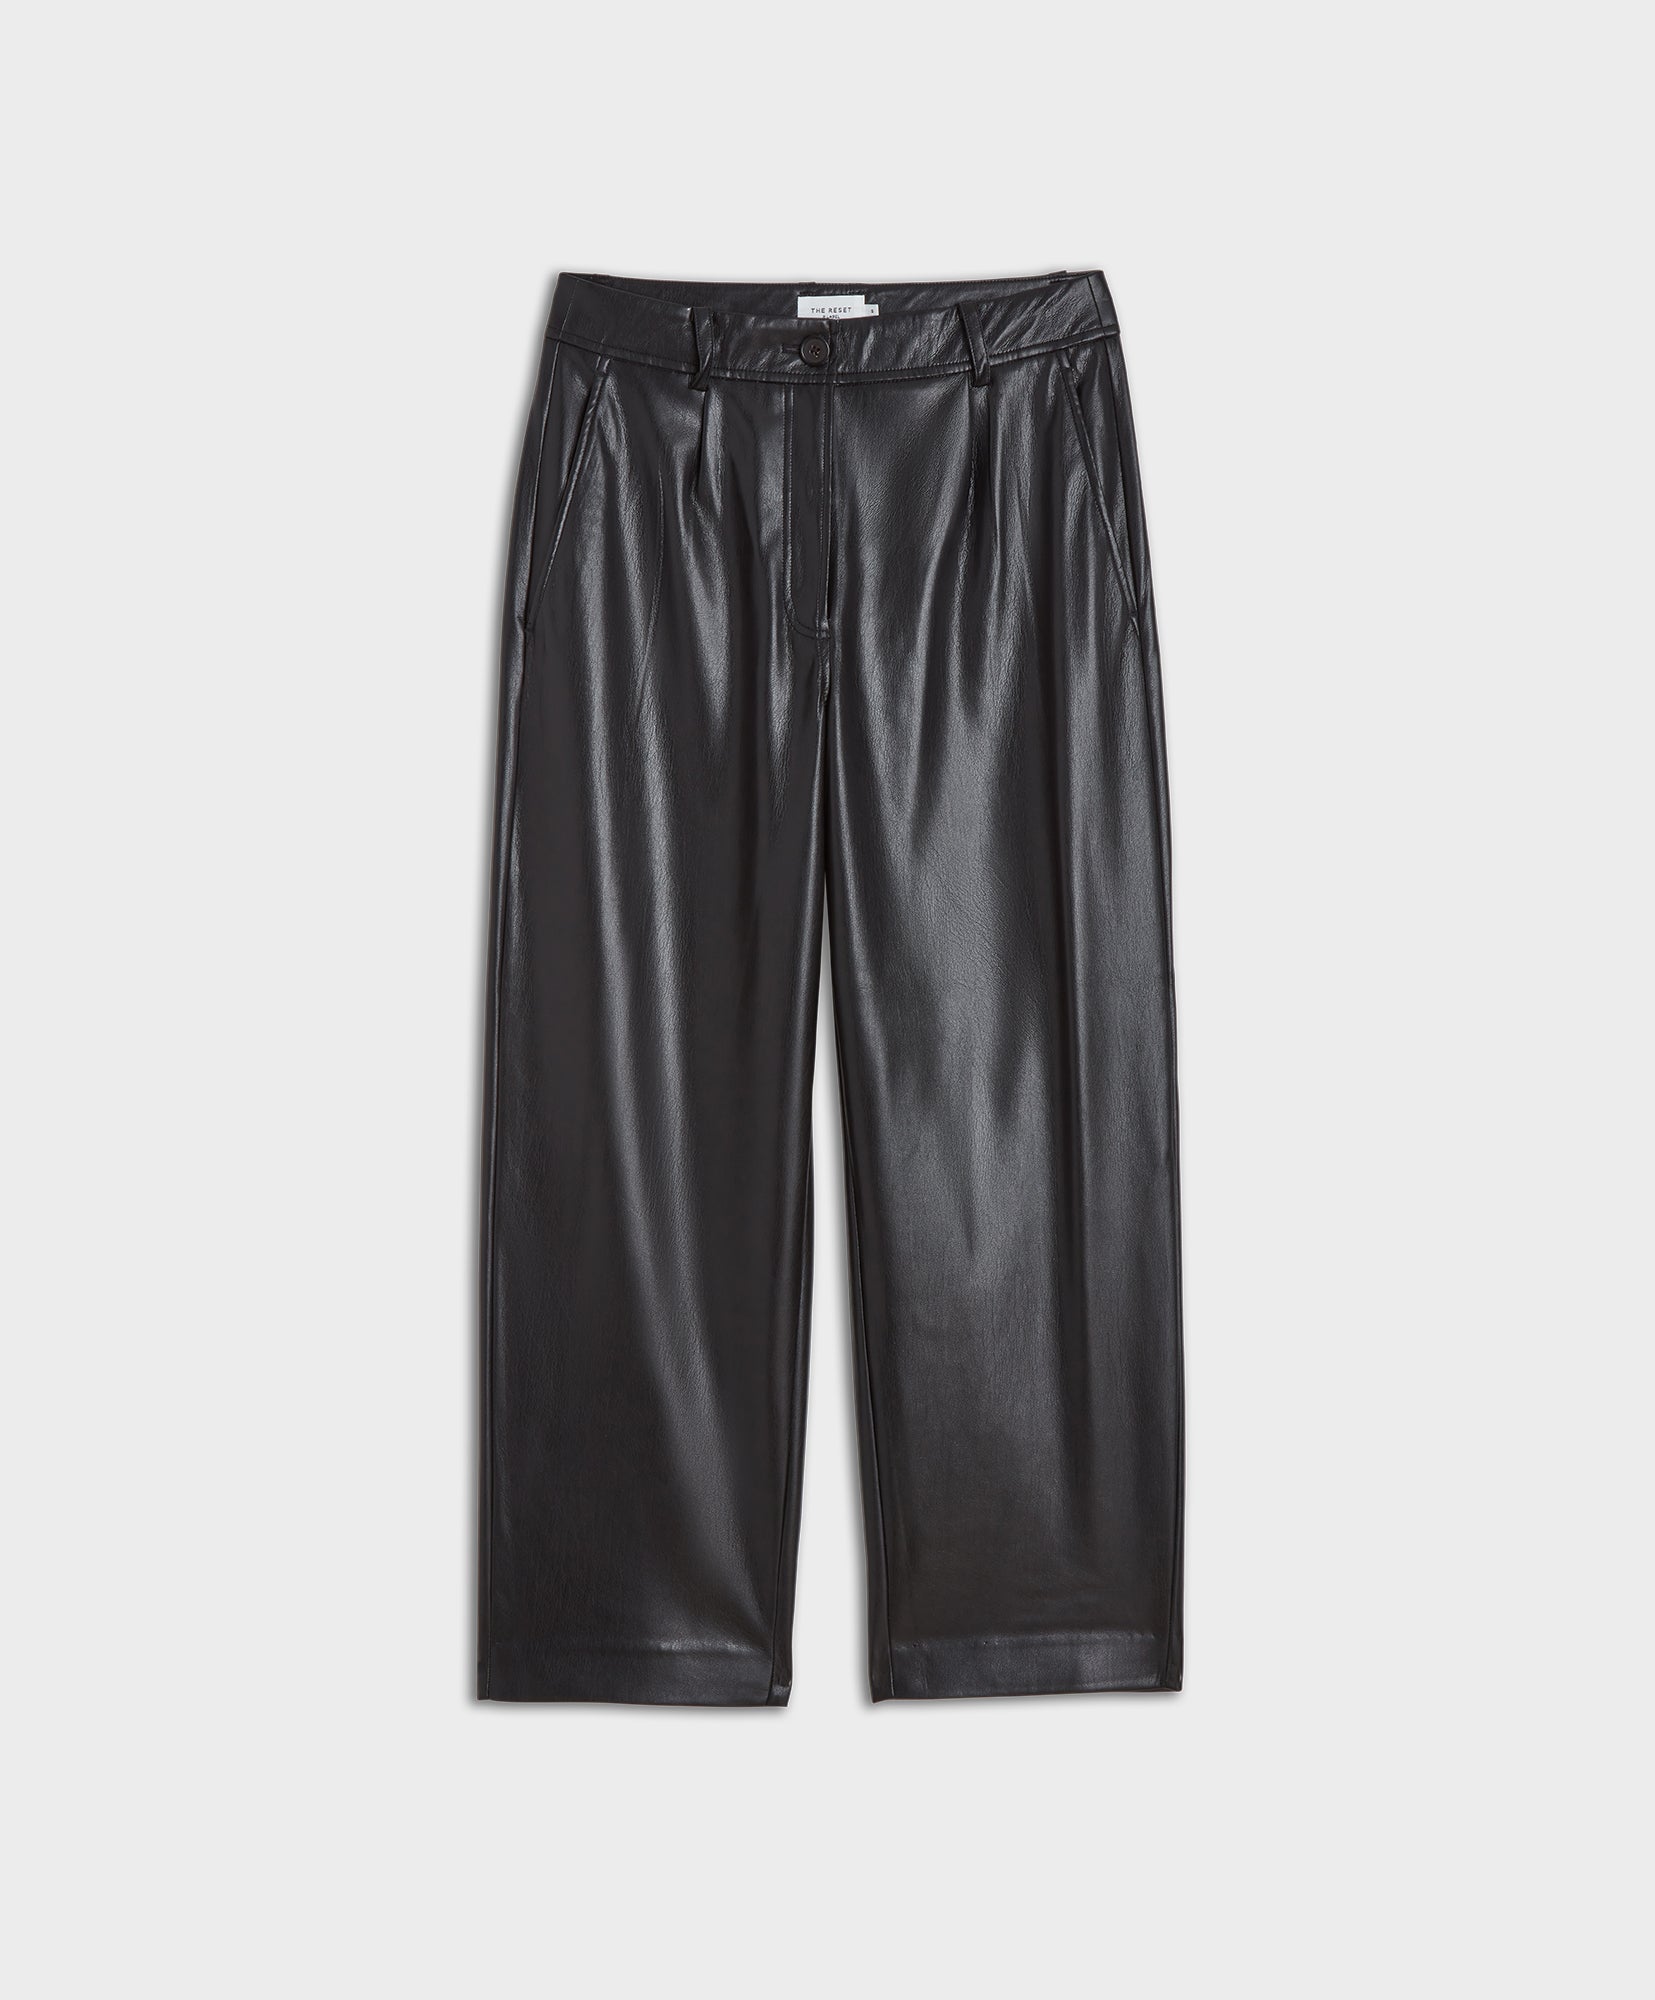 Shop Slouchy Leather Pants: Vegan Leather Women's Trousers – The Reset